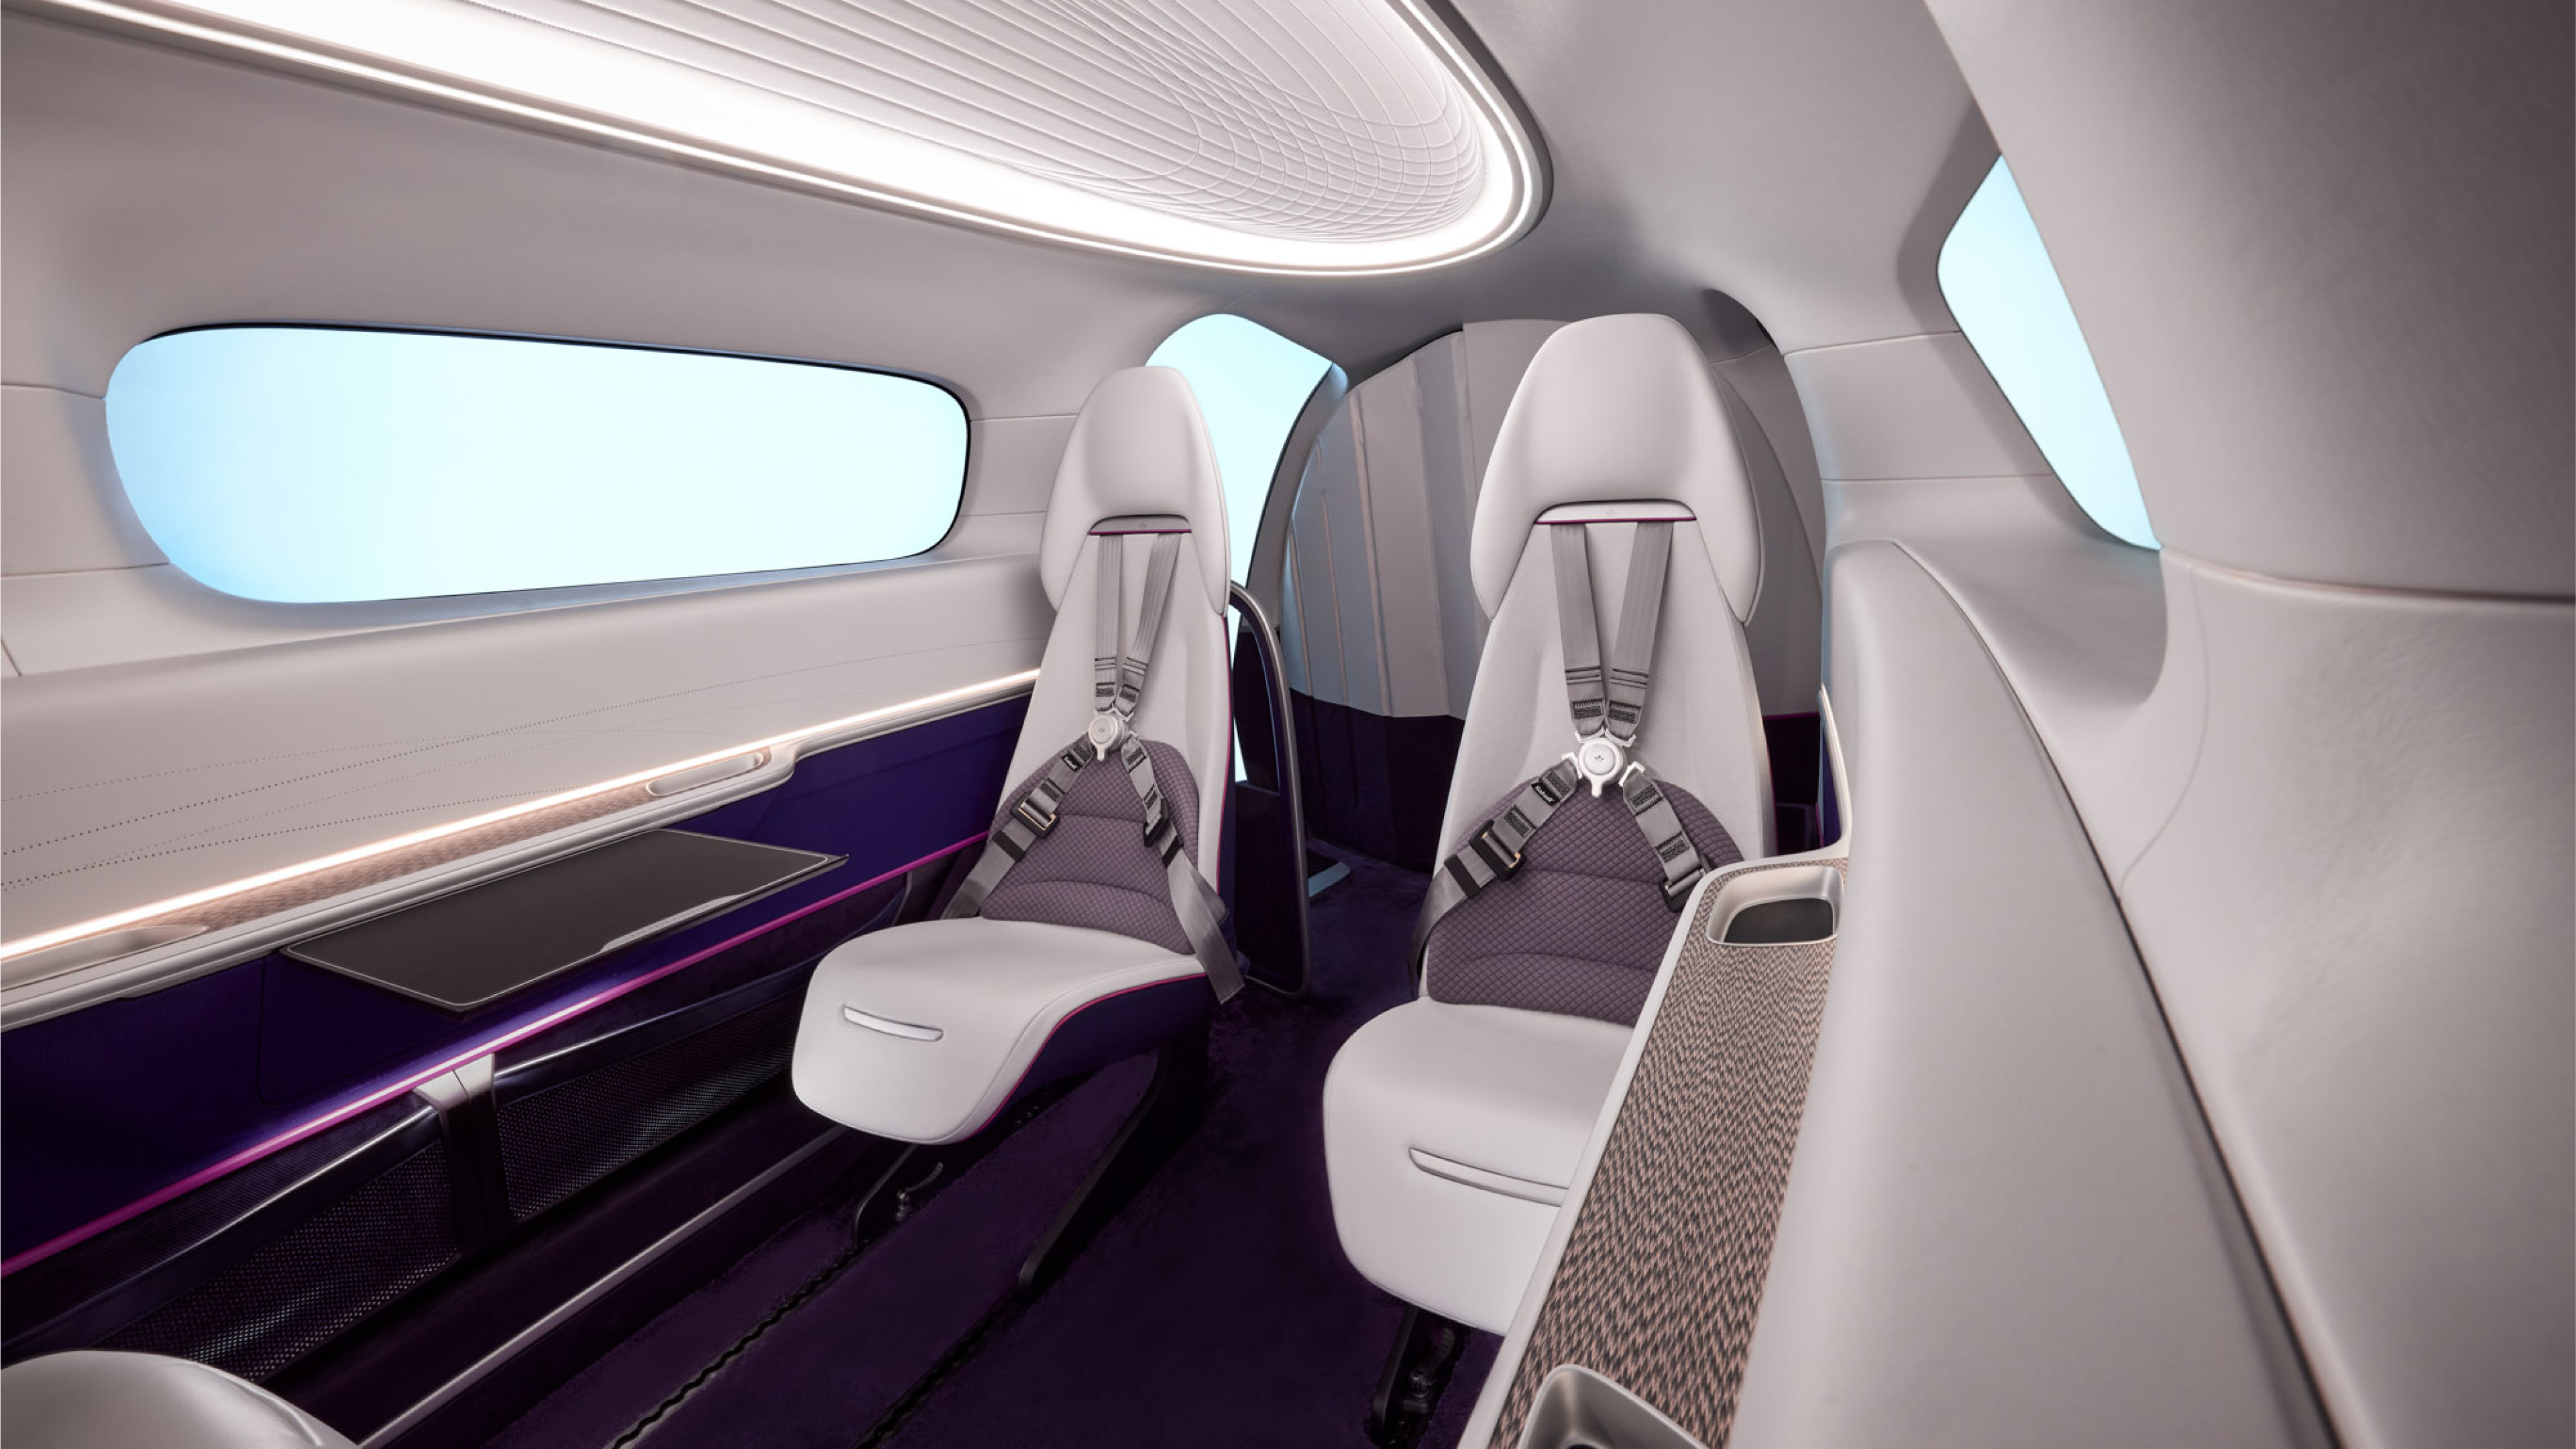 Mock up of interior of air taxi drone. Image: copyright Lilium